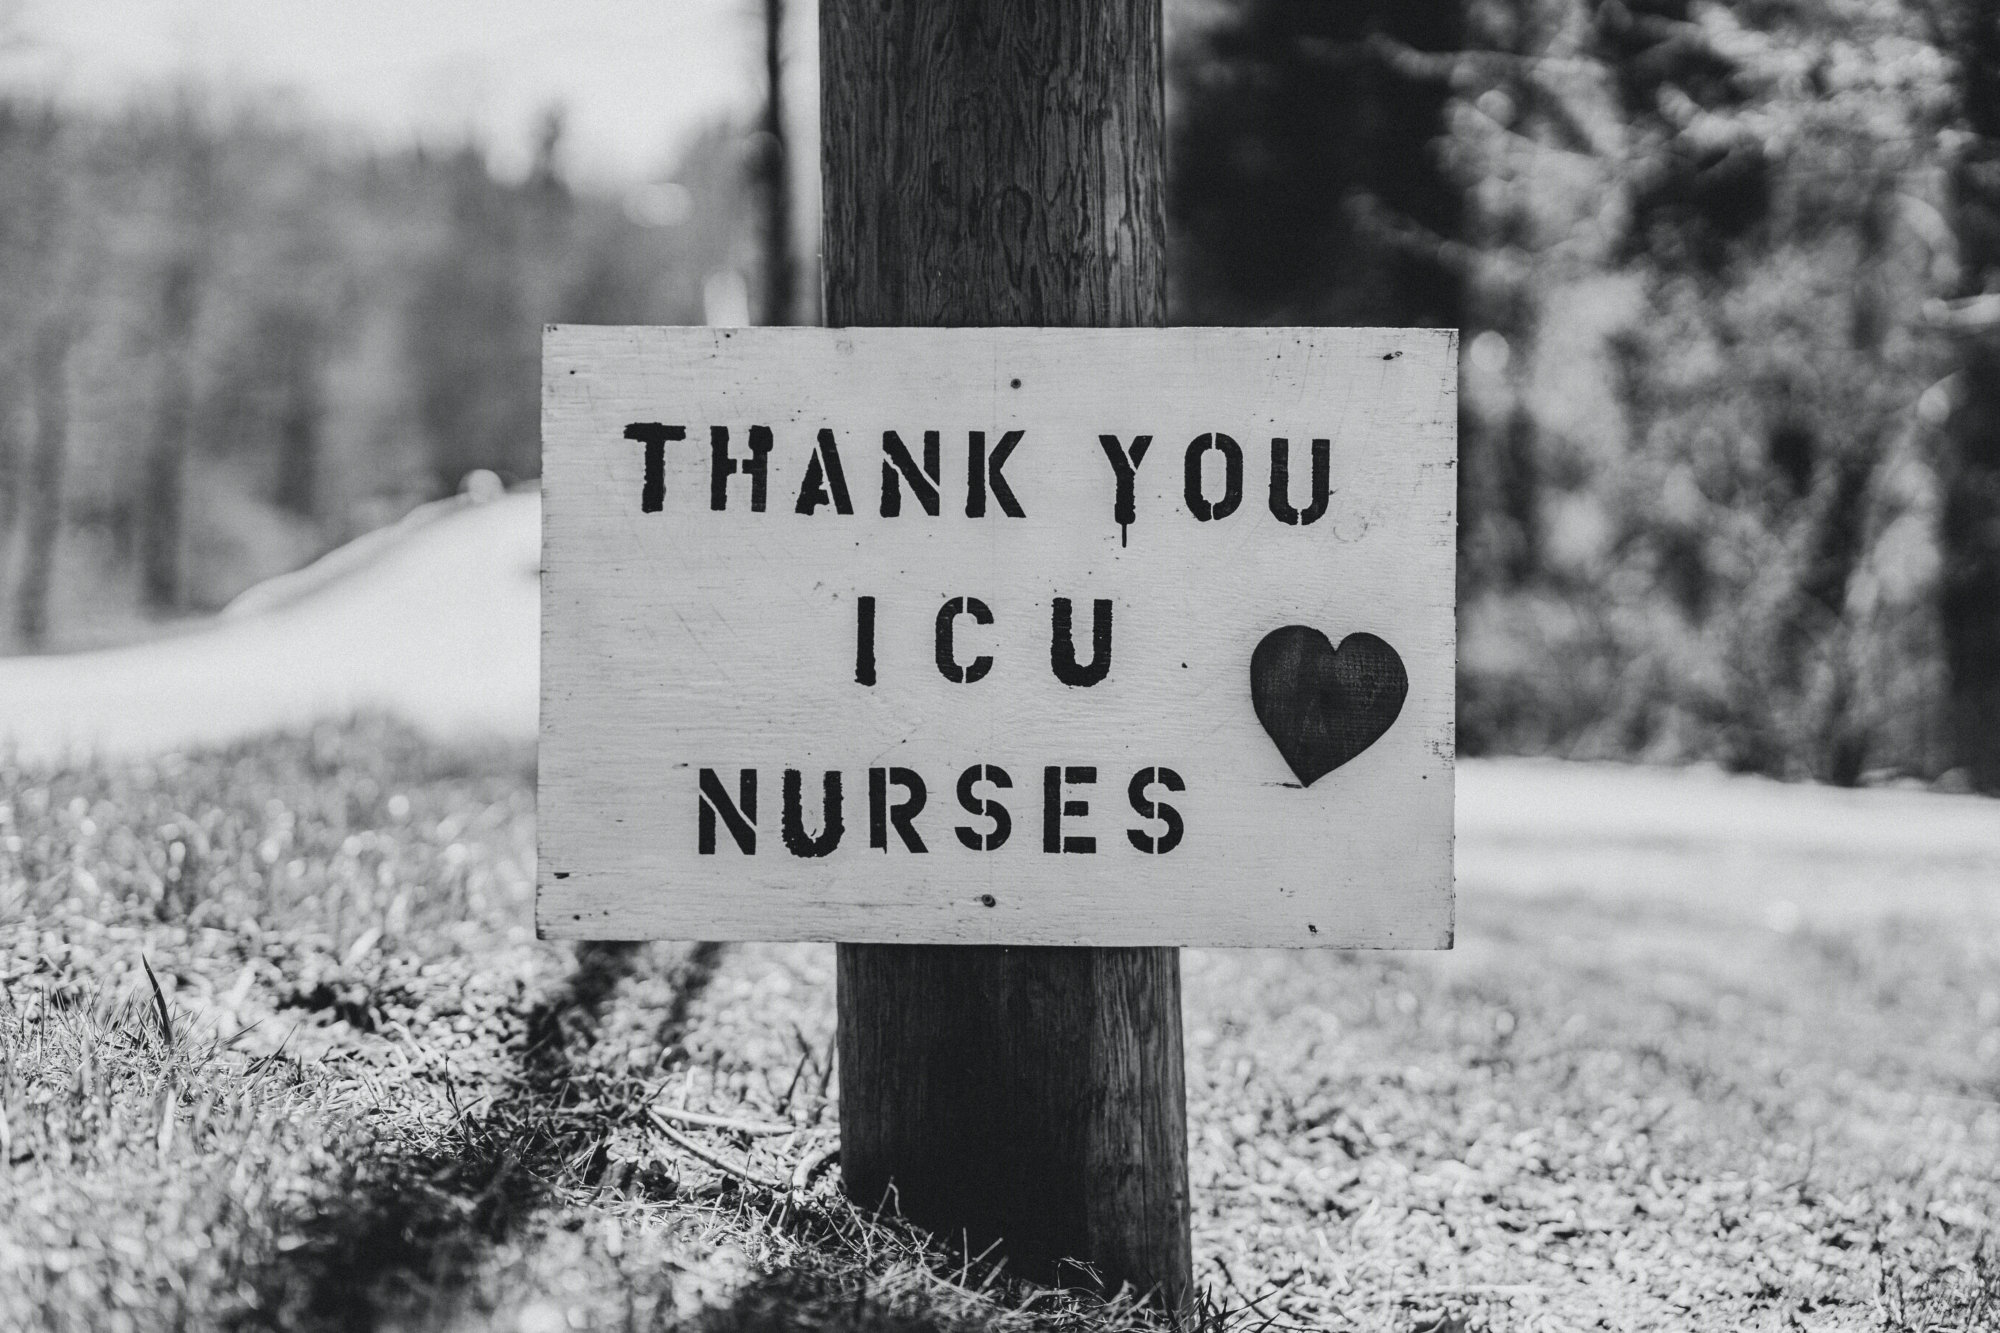 A ‘Thank You’ sign on a telephone pole in Connecticut, USA, to celebrate the efforts of ICU nurses during the COVID-19 pandemic (Source: Nicholas Bartos/Unsplash)